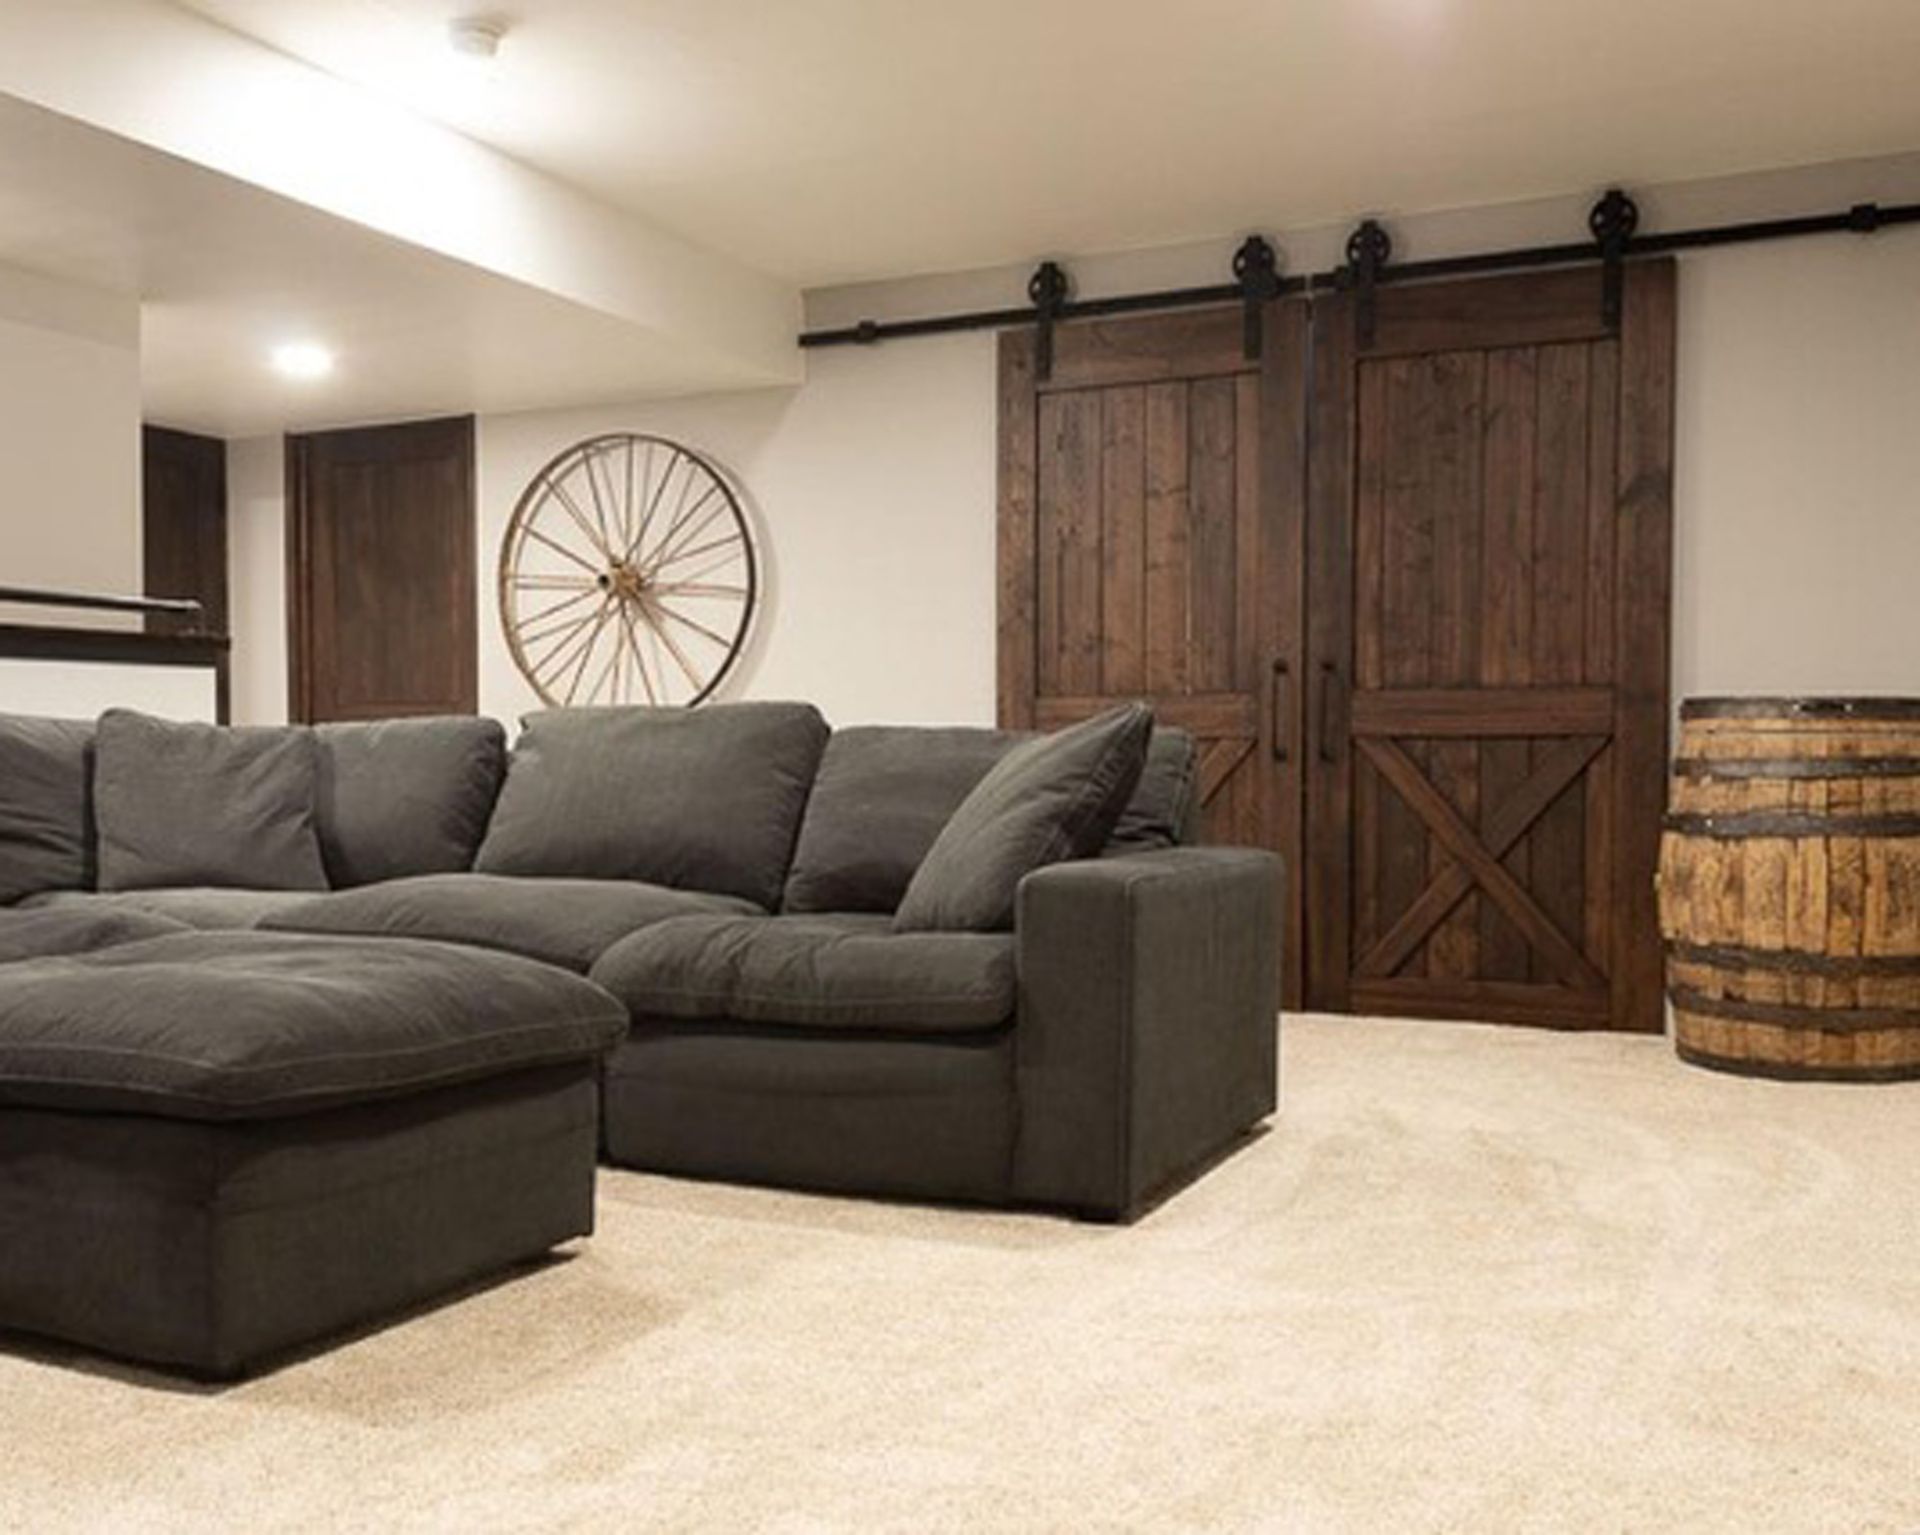 28 basement ideas to convert your downstairs space into a hidden gem of ...